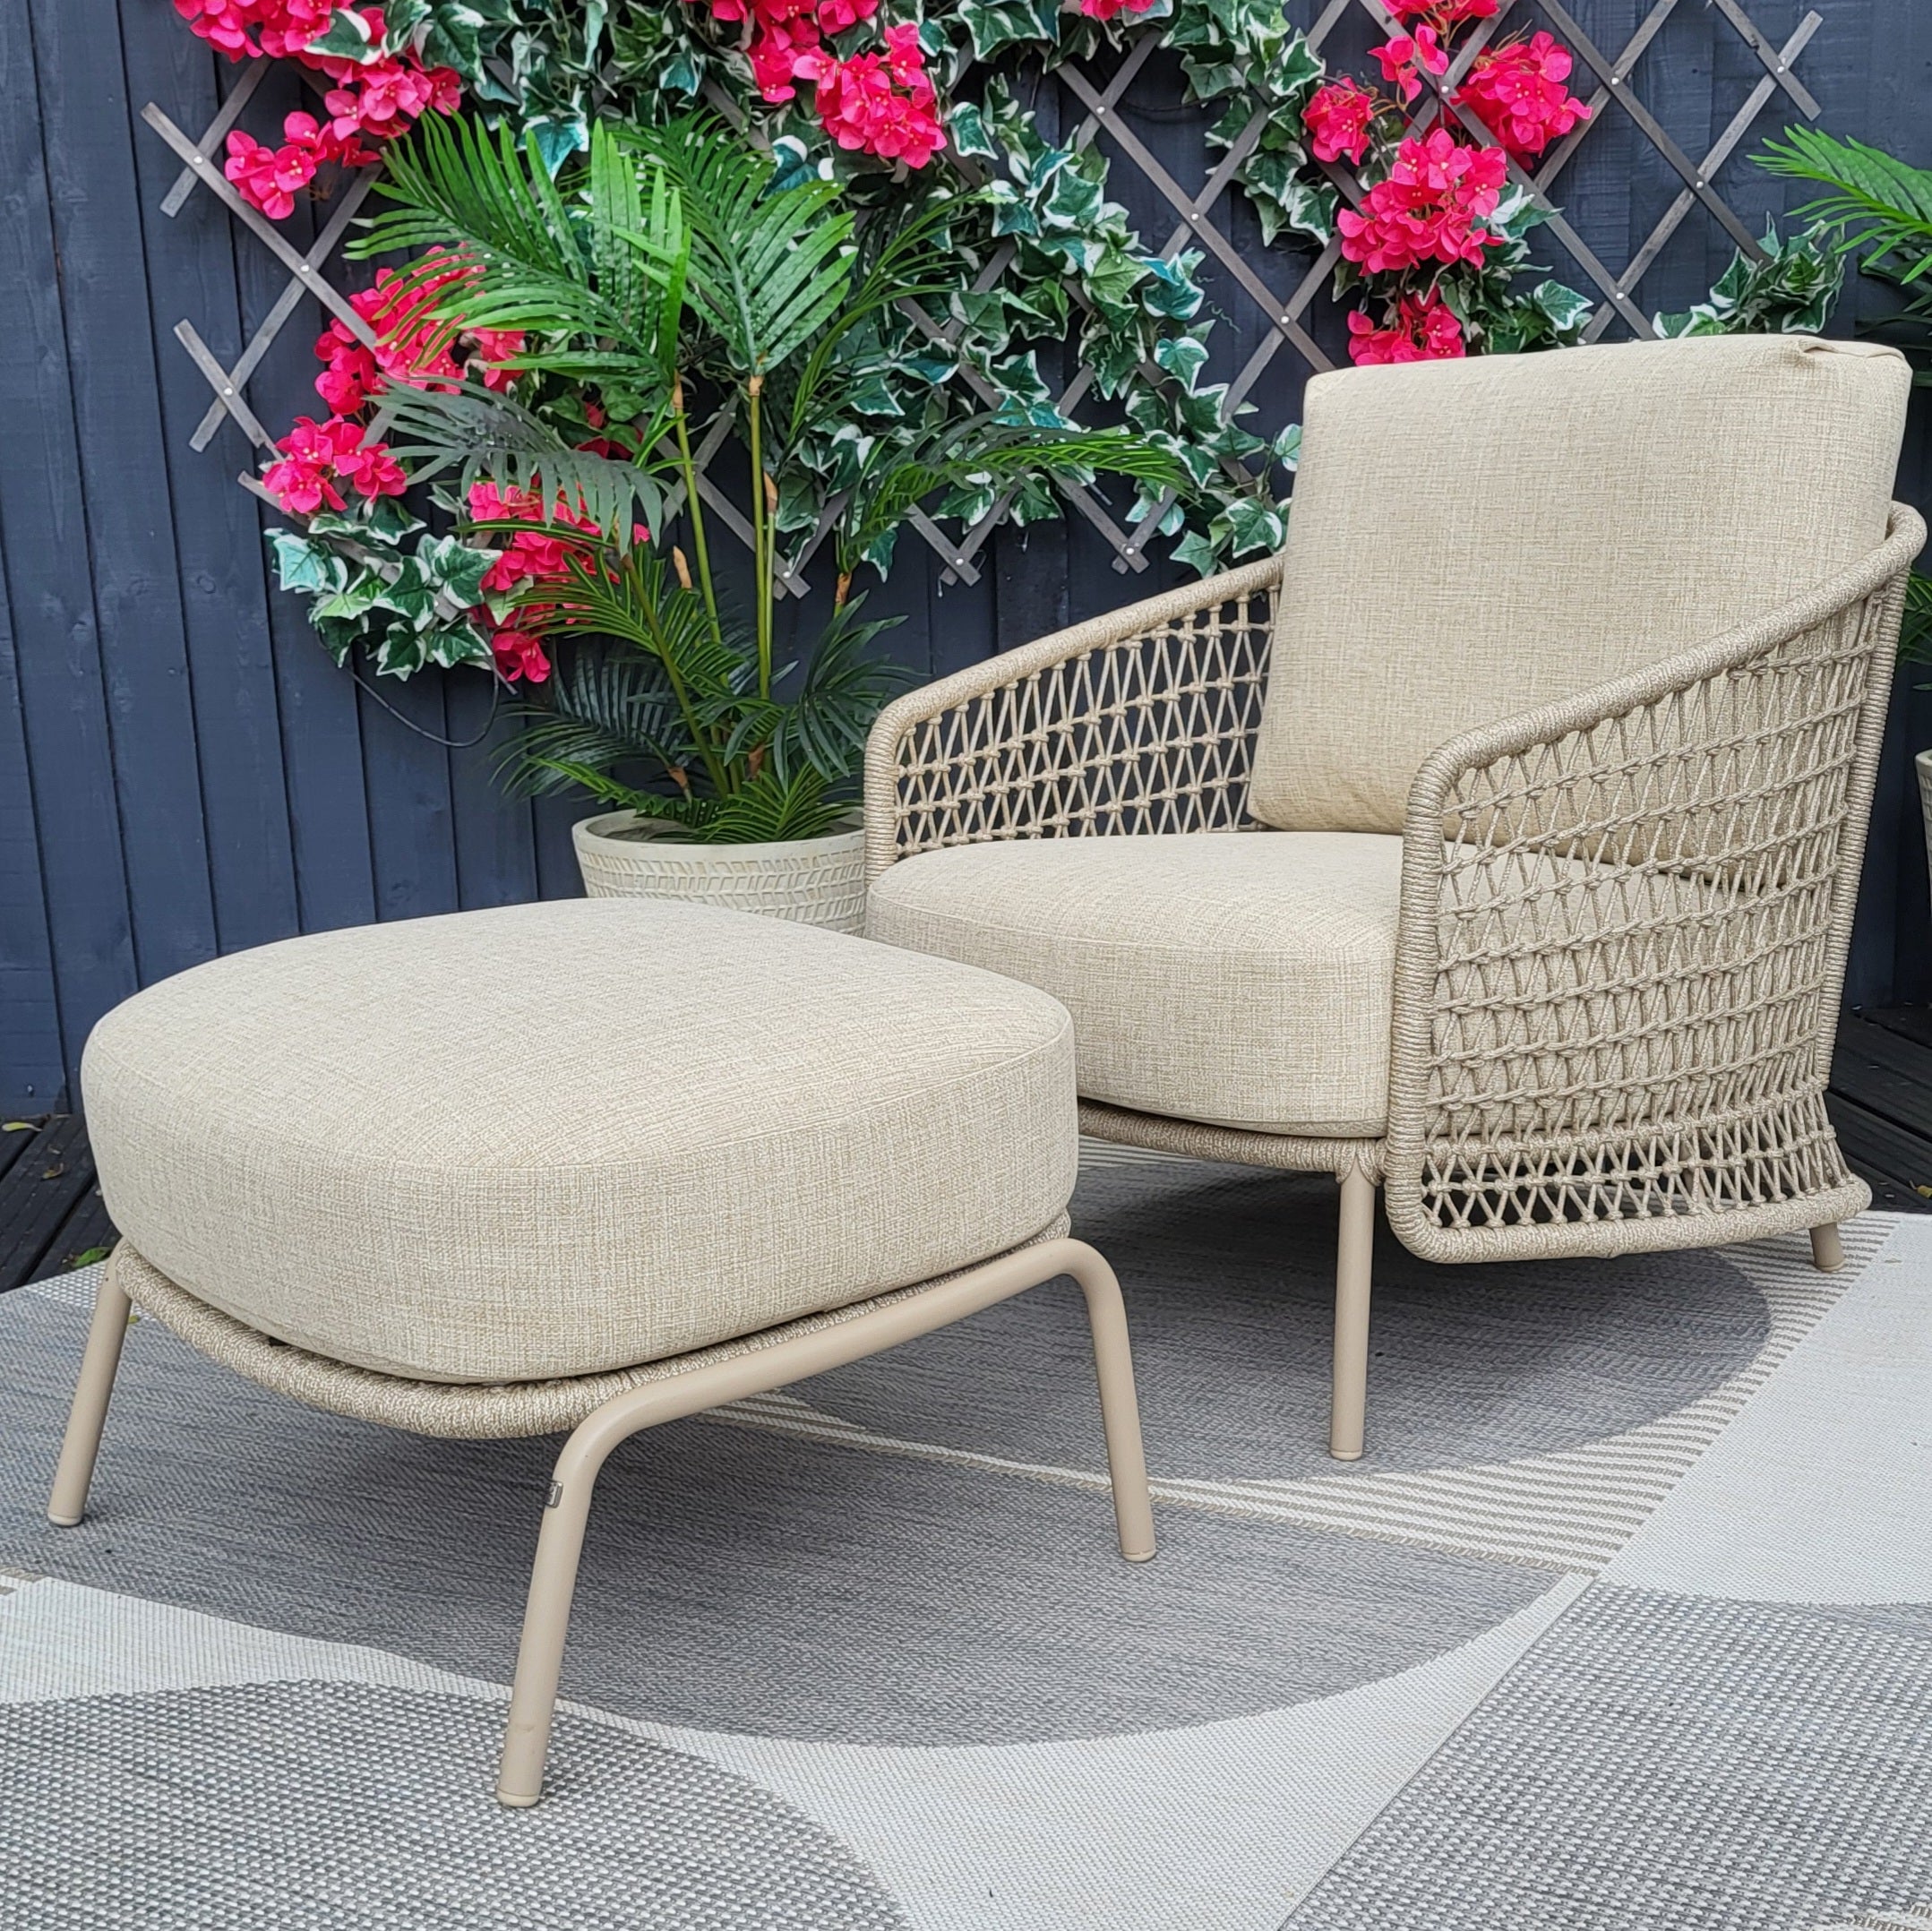 Puccini Outdoor Stool by 4 Seasons Outdoor